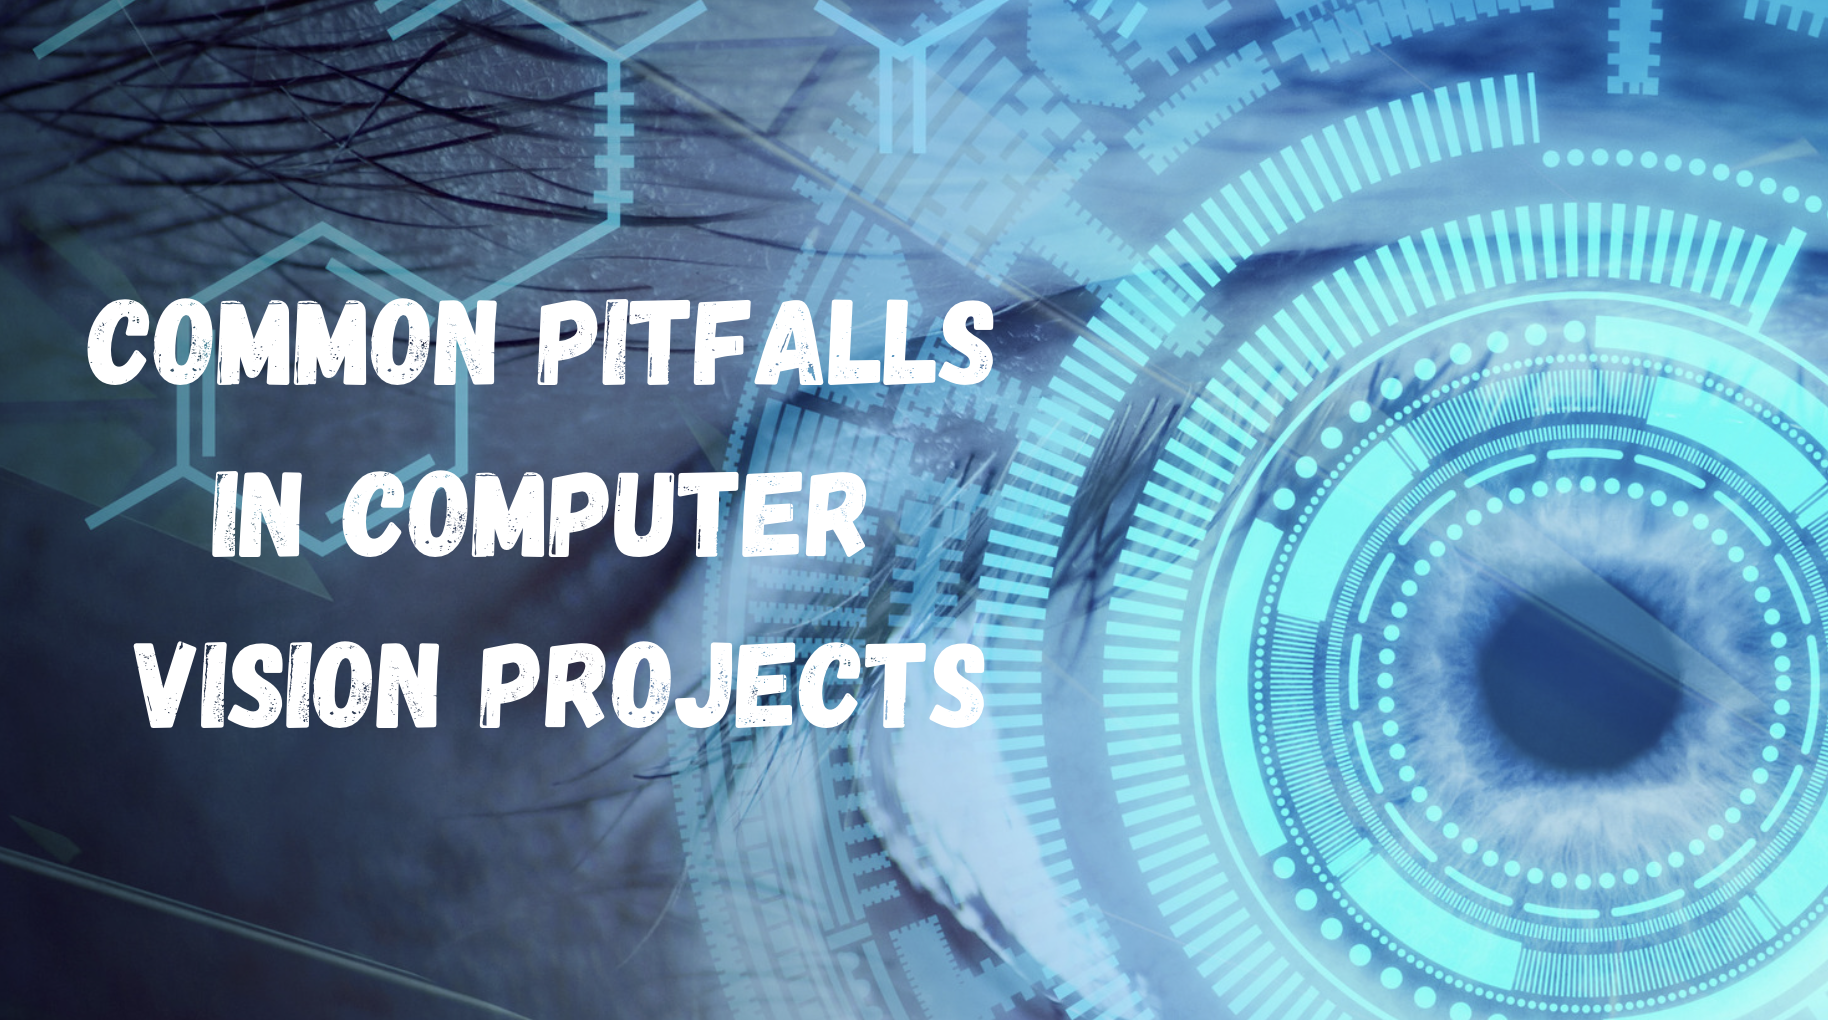 Common Pitfalls in Computer Vision Projects